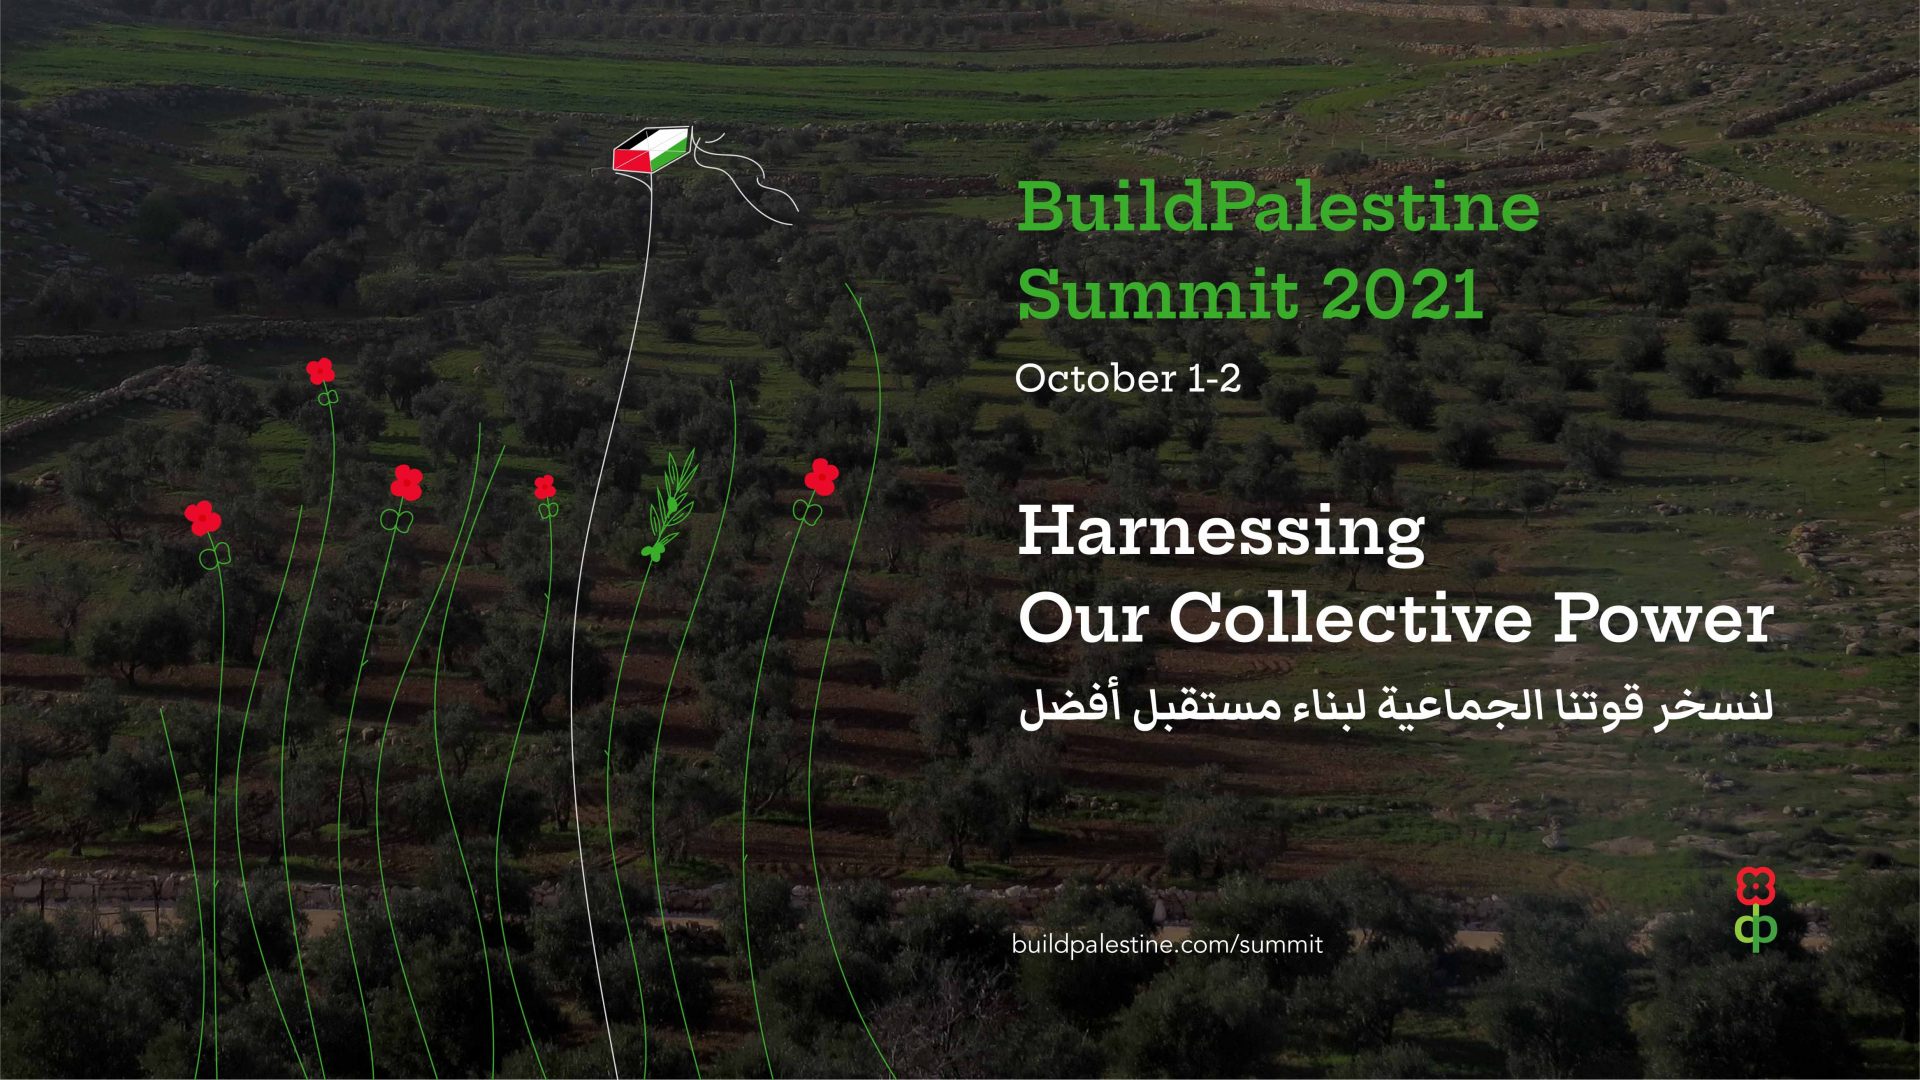 By Palestinians, for Palestine: BuildPalestine’s second summit set to build on a renewed sense of unity across Palestine and the Diaspora.